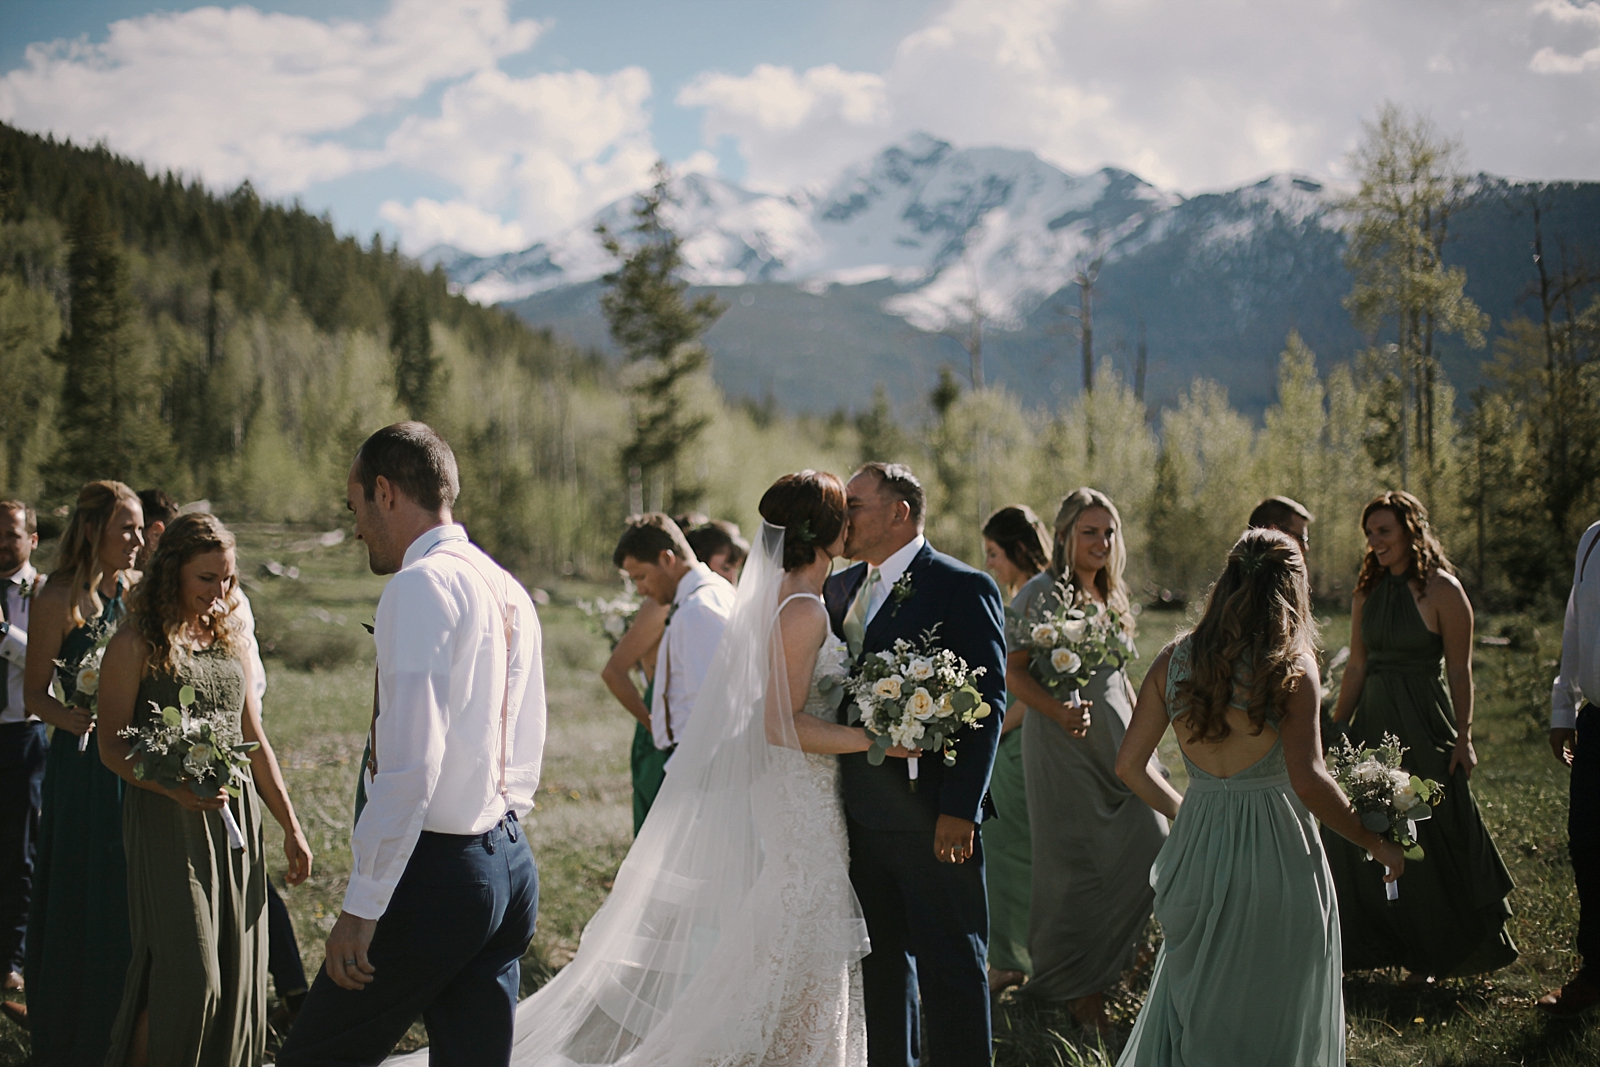 bridal party at agape outpost, the church at agape outpost wedding, breckenridge colorado wedding, breckenridge colorado wedding photographer, agape outpost wedding photographer